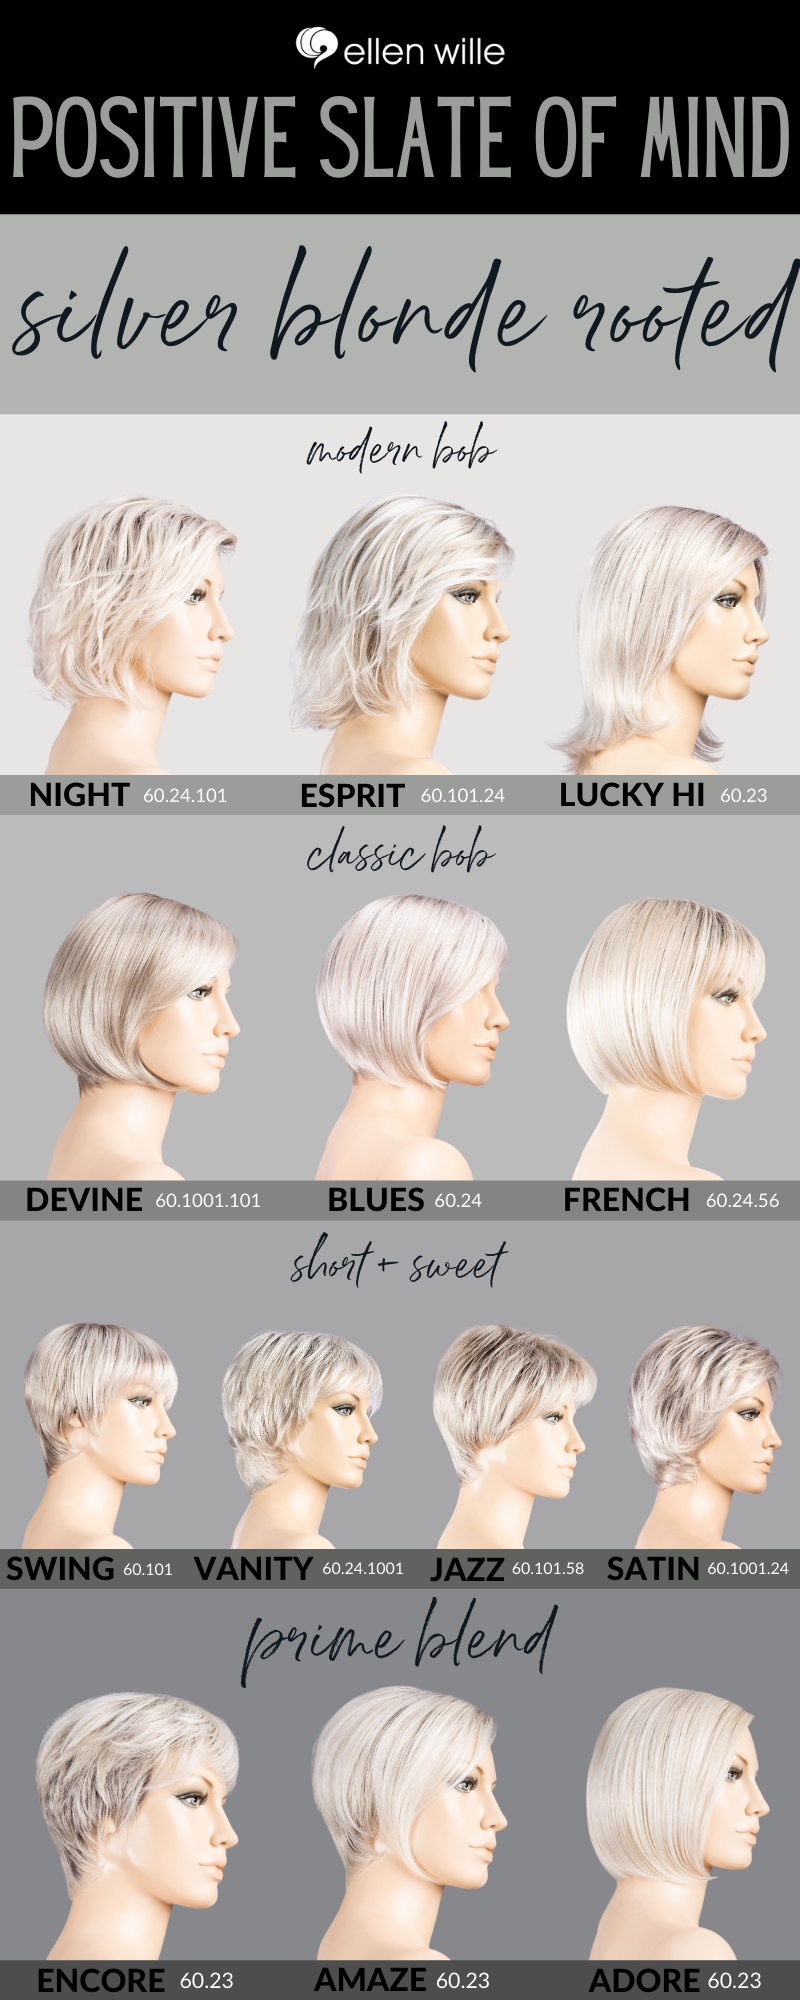 Silver Blonde Rooted Styles